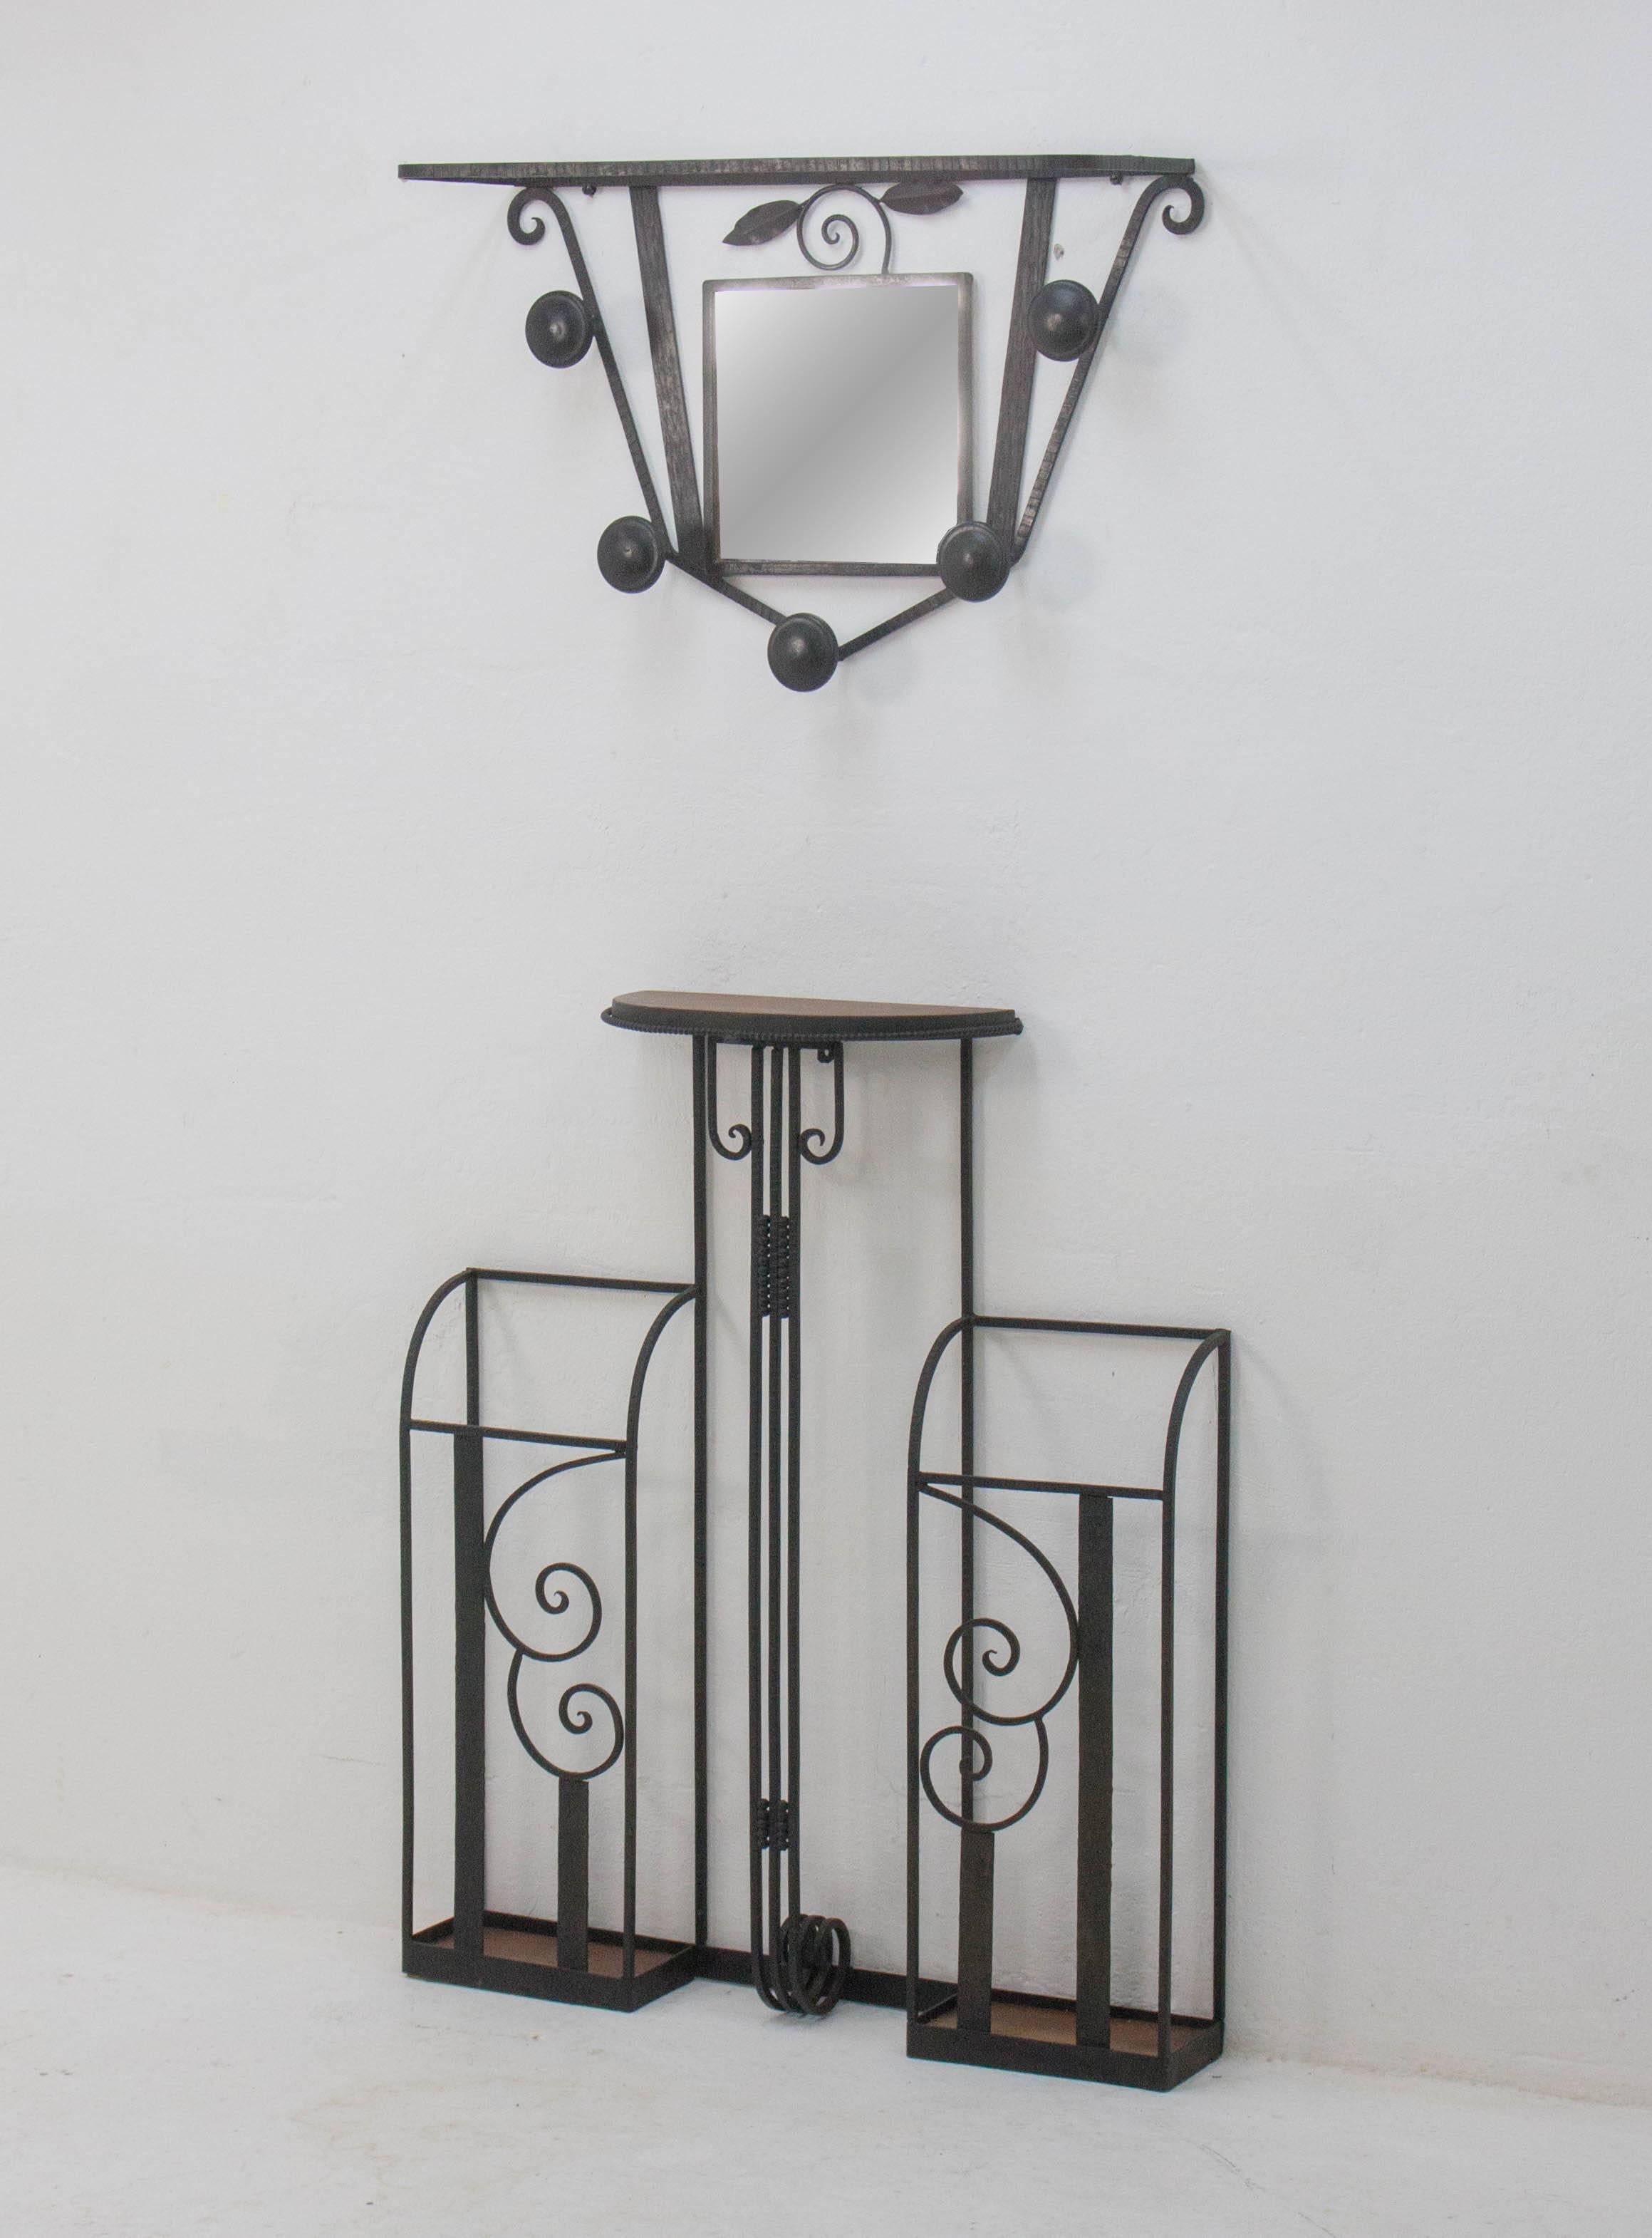 Graceful Dutch art deco wall-mounted hallway set consisting of an umbrella stand and a coat rack incorporating a small mirror. Cast iron and oak.

The lower umbrella stand part is 86cm tall, 72.5cm wide and 17cm deep, the upper coatrack part is 41cm